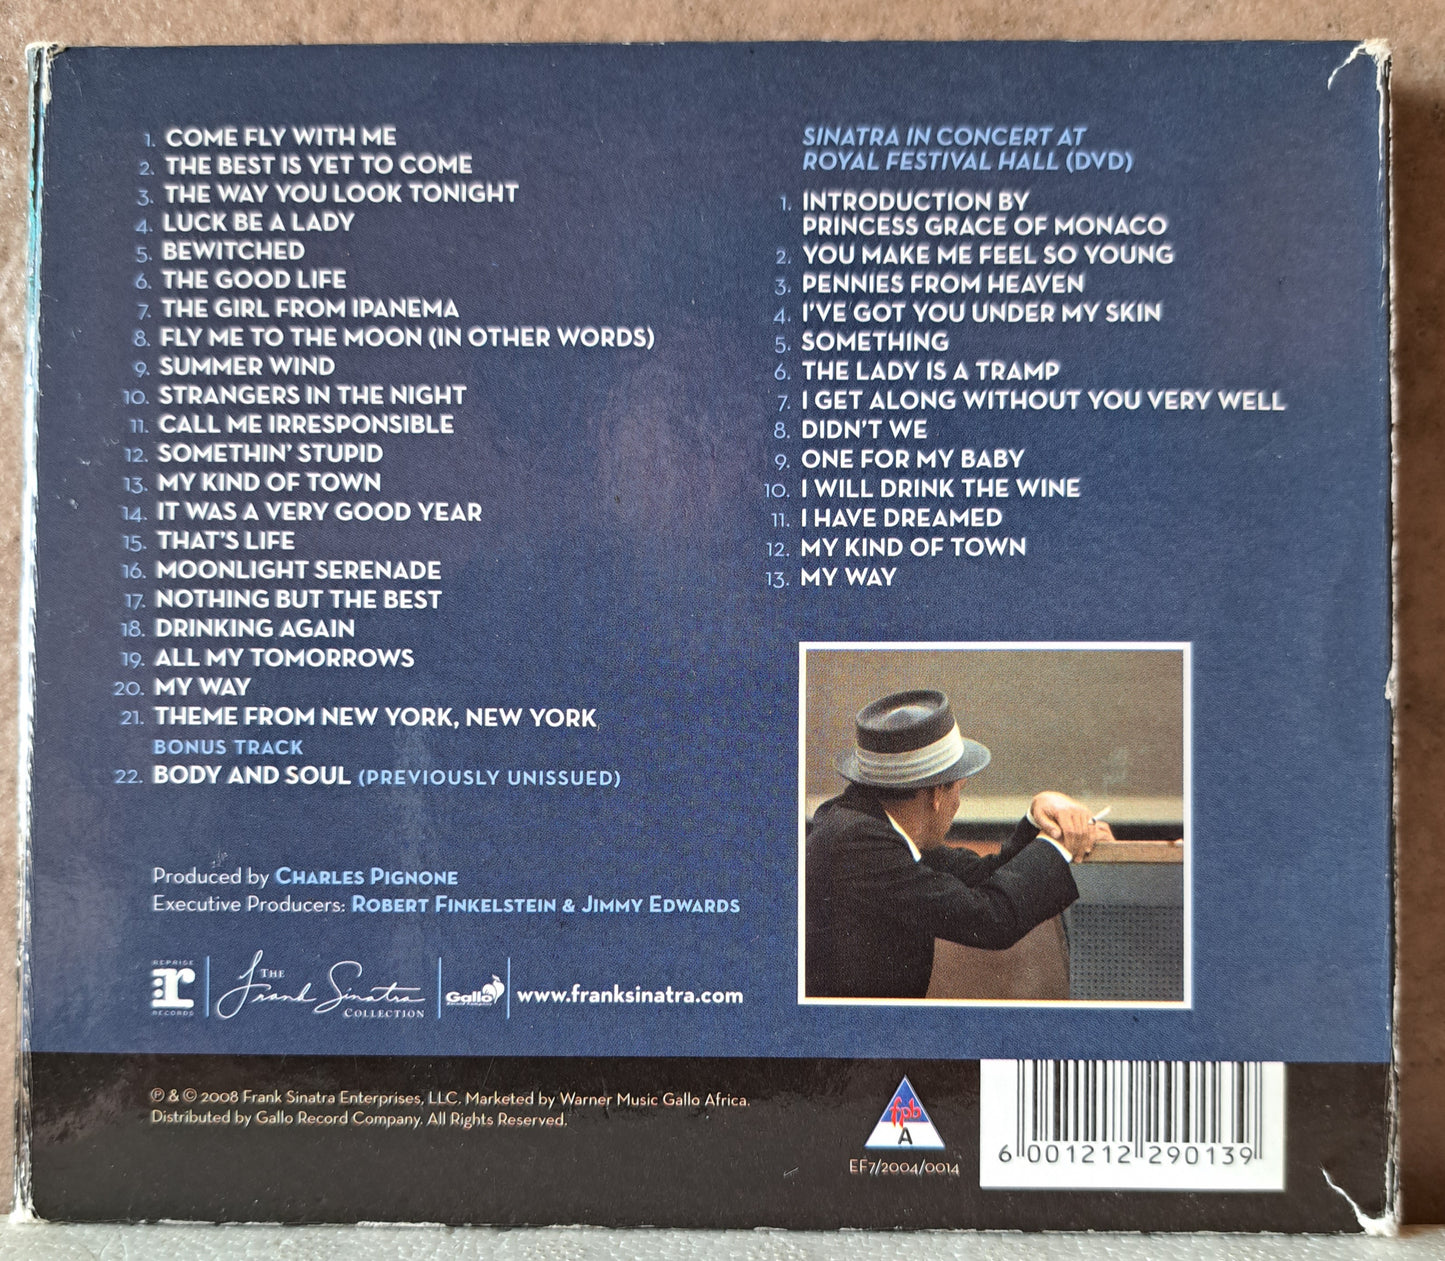 Frank Sinatra - Nothing of the best (cd/dvd combo)